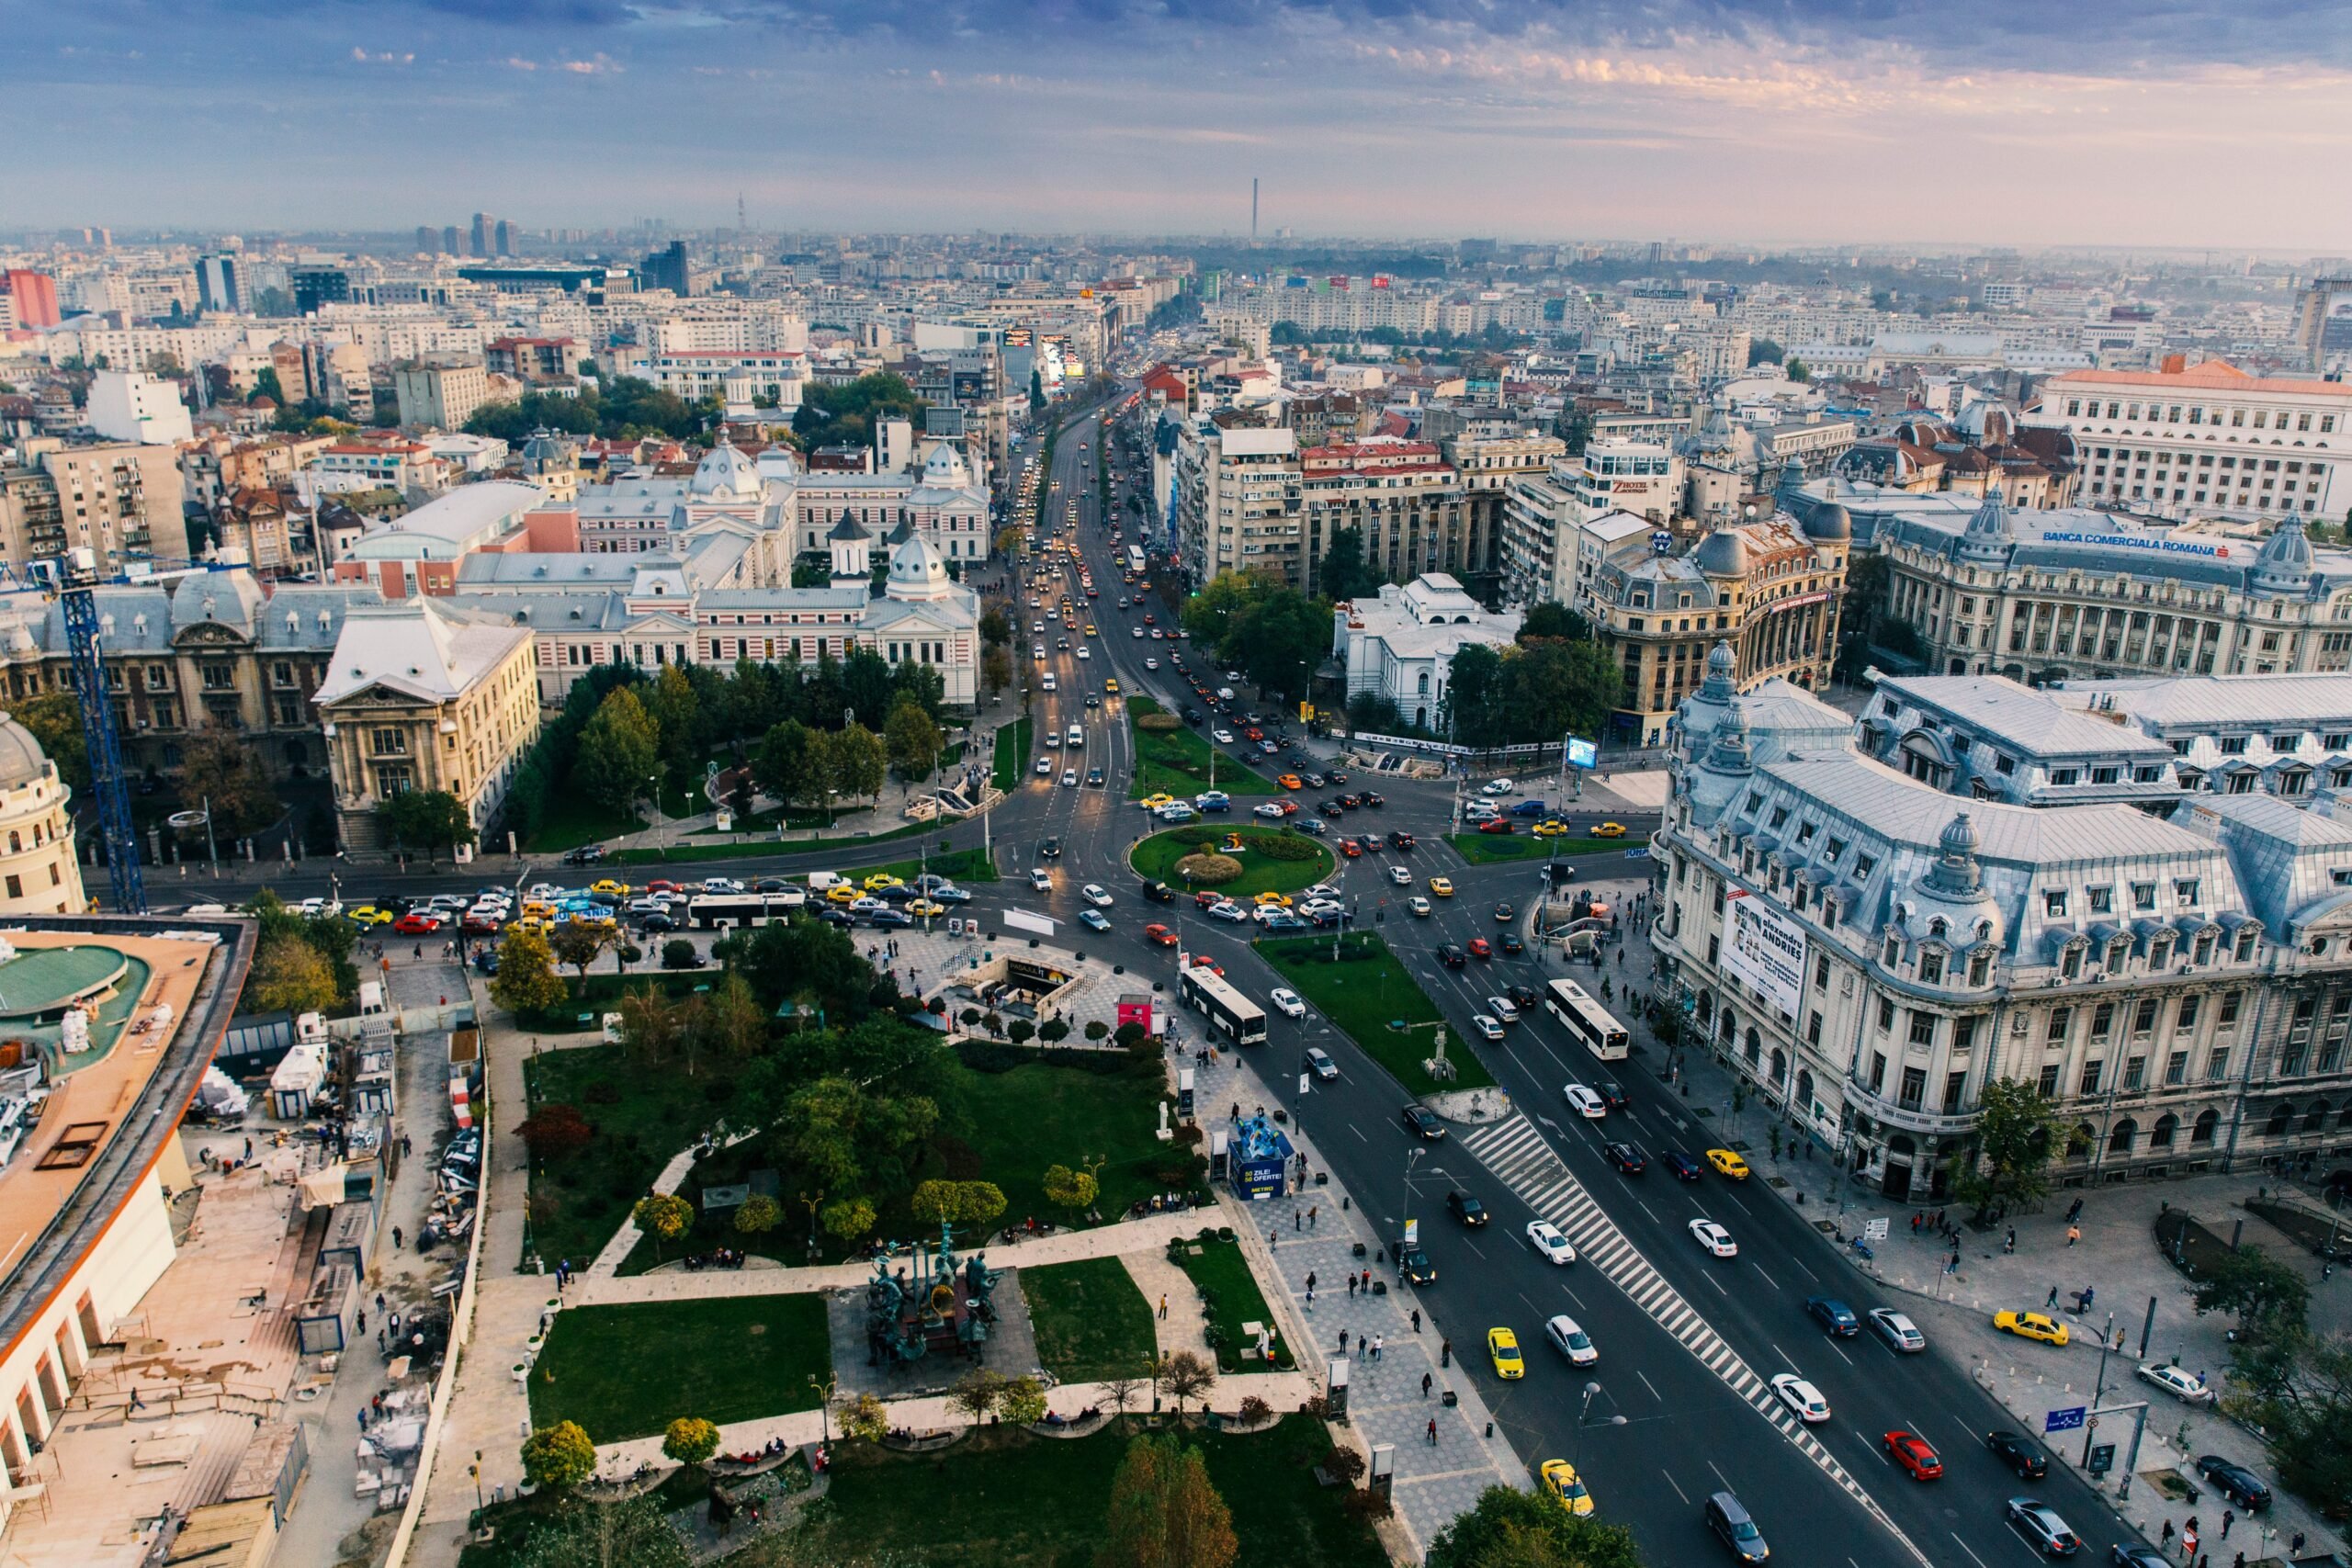 An aerial view of  Bucharest, Romania